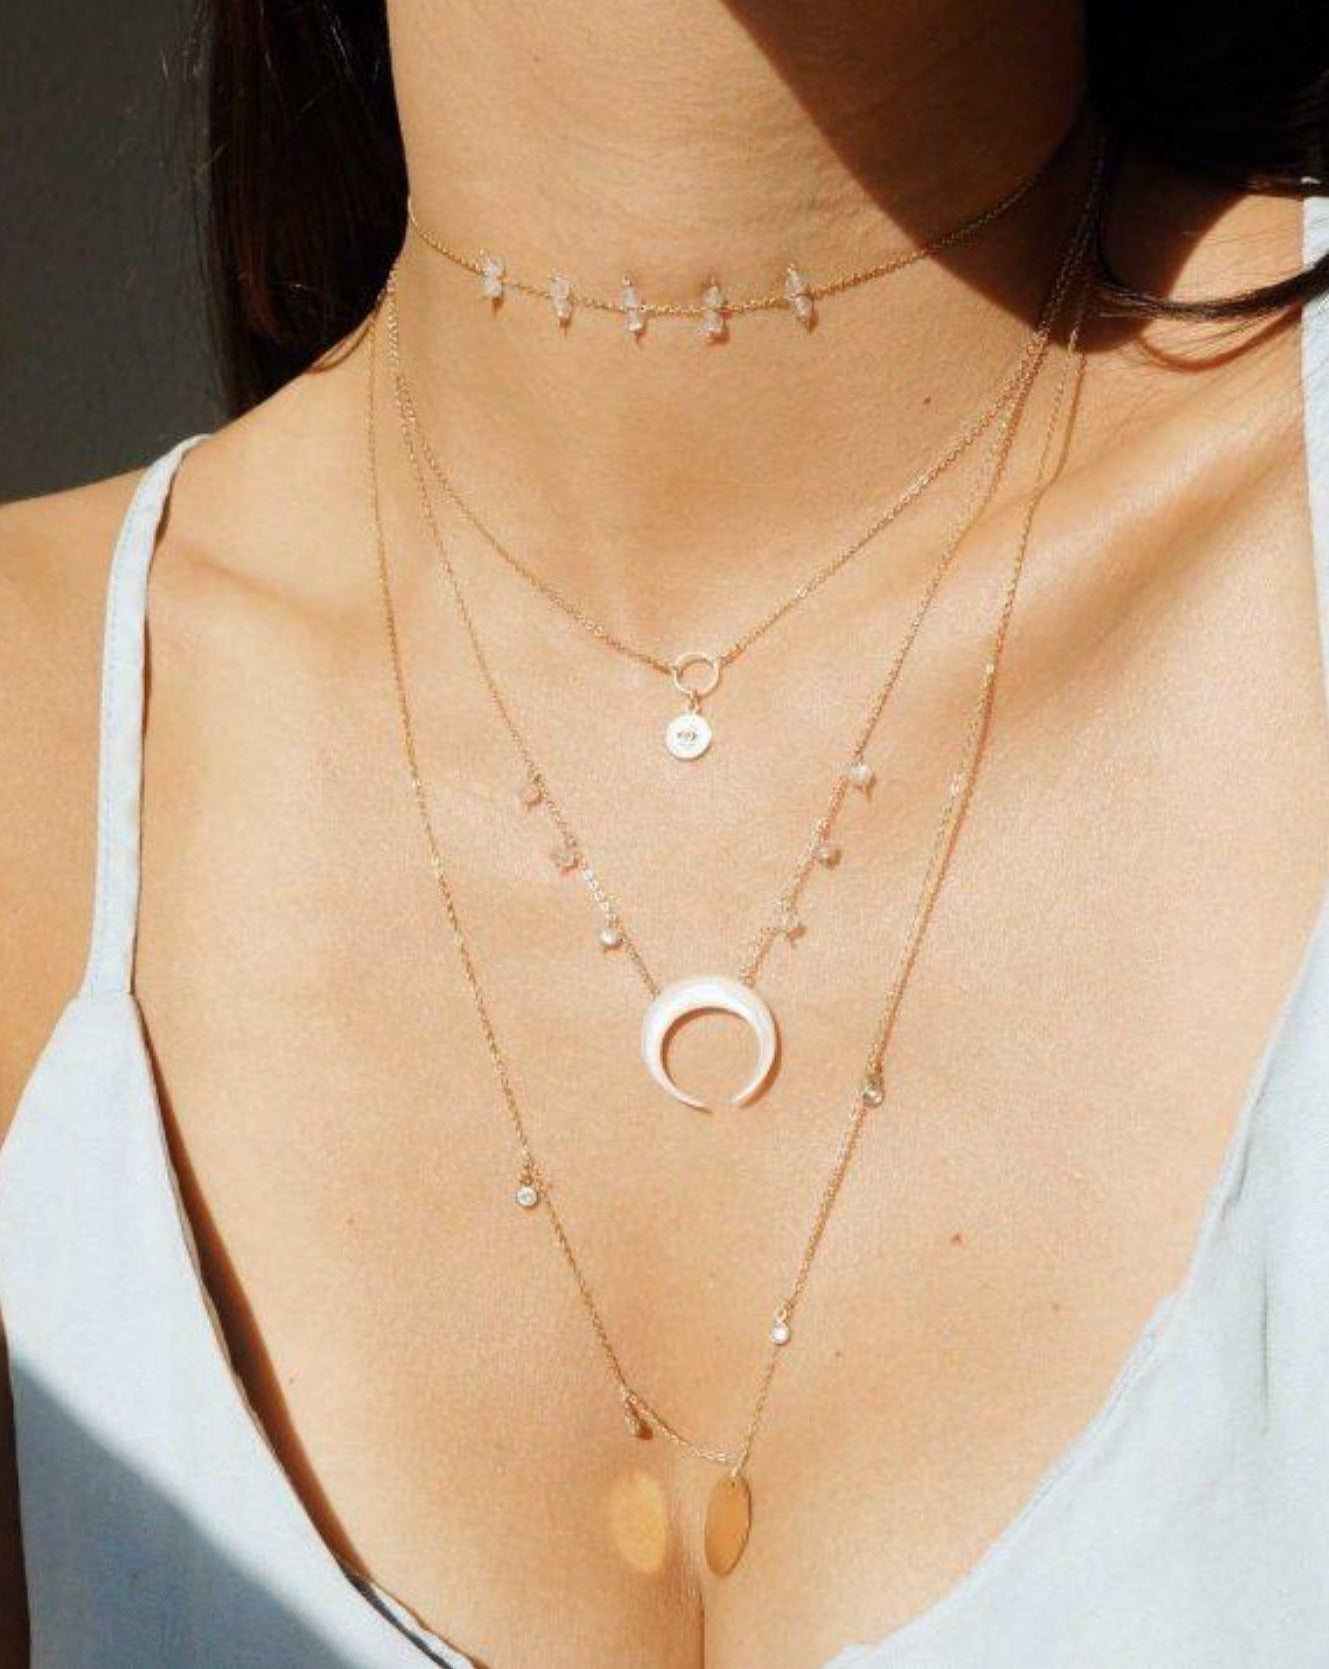 Baque Moon Necklace by KOZAKH. A 16 to 18 inch adjustable length necklace in 14K Gold Filled, featuring a 20mm hand-carved Mother of Pearl moon charm and 2mm faceted Moonstones.